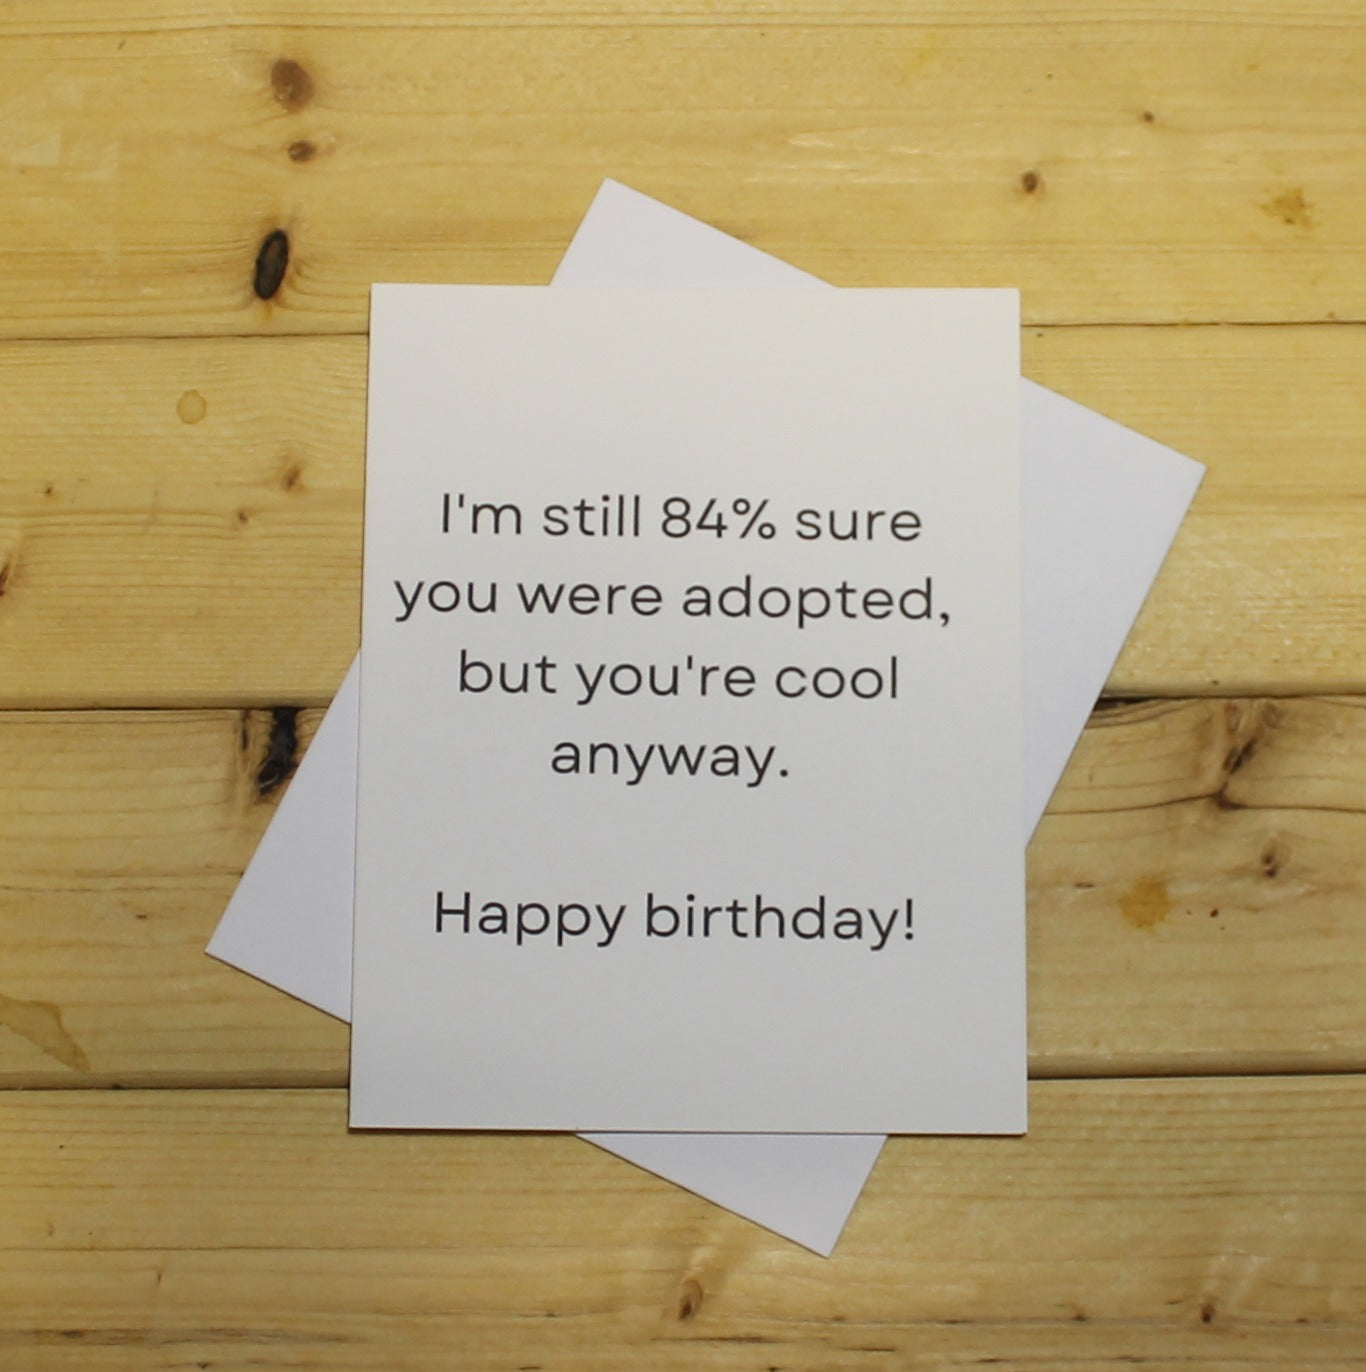 Funny Birthday Card: "I'm still 84% sure you're adopted, but you're cool anyway."